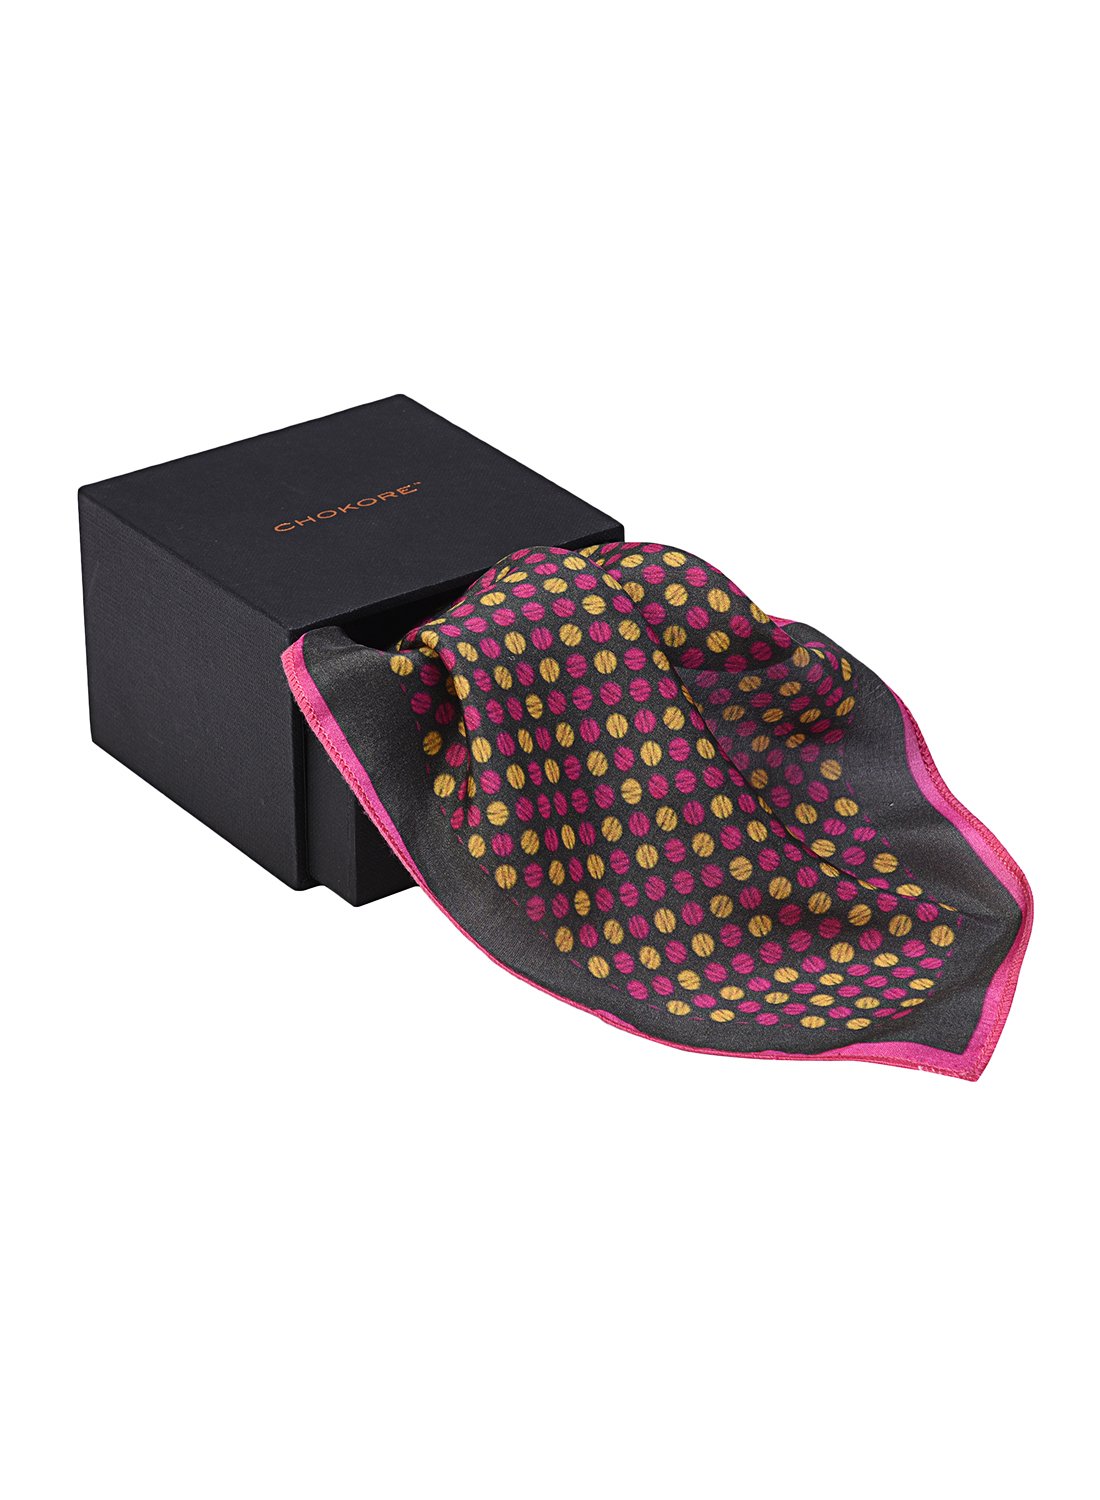 Chokore yellow and pink dotted Silk Pocket Square